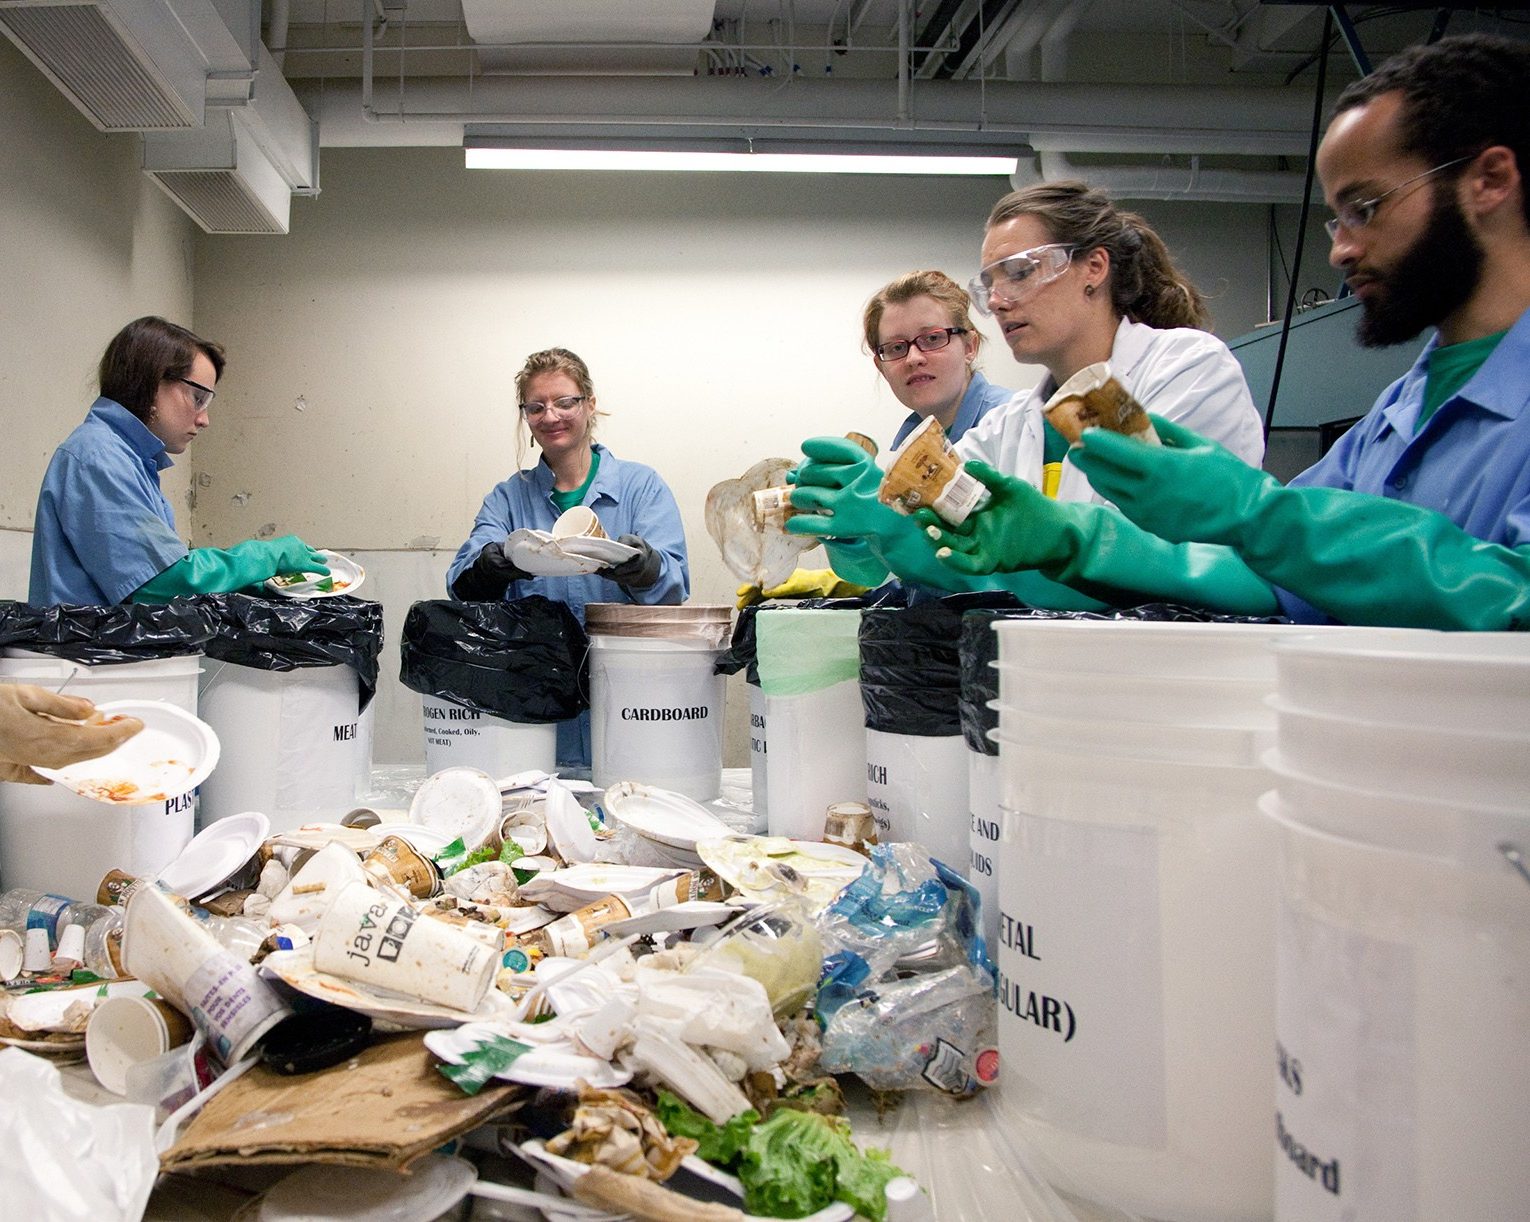 a group of people in lab coats and gloves sorting waste for recycling